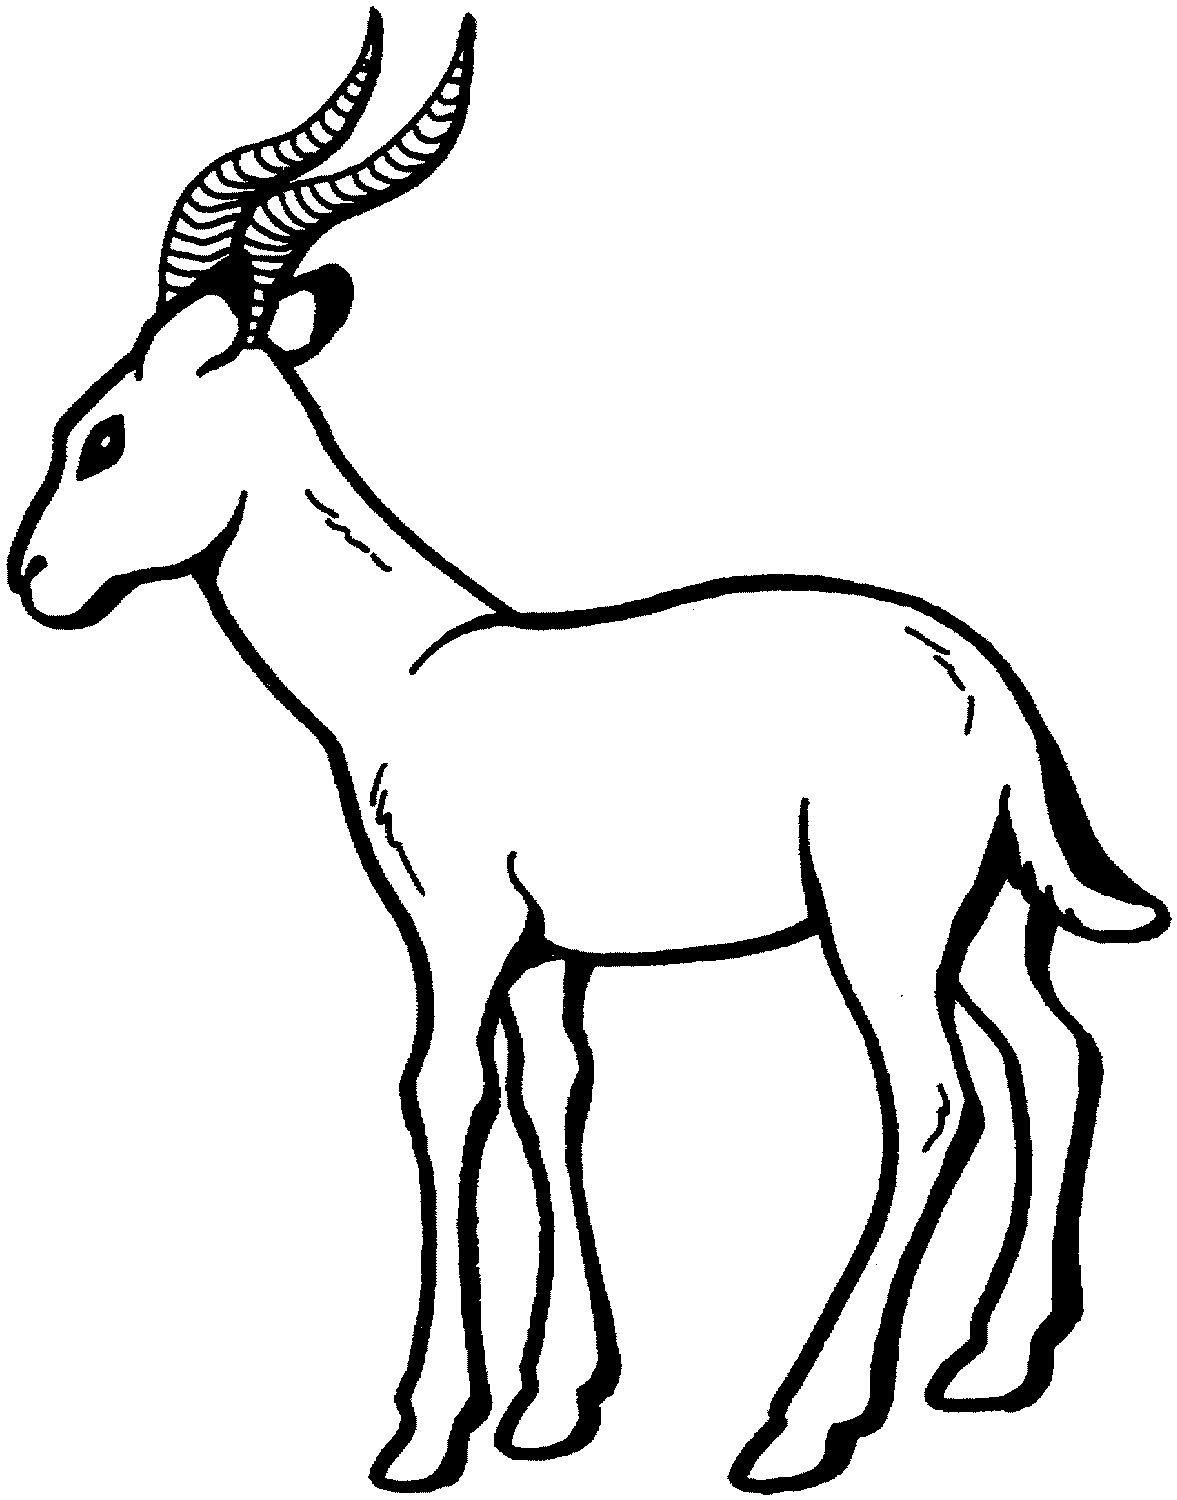 free-animals- antelope -printable-coloring-pages-for-preschool